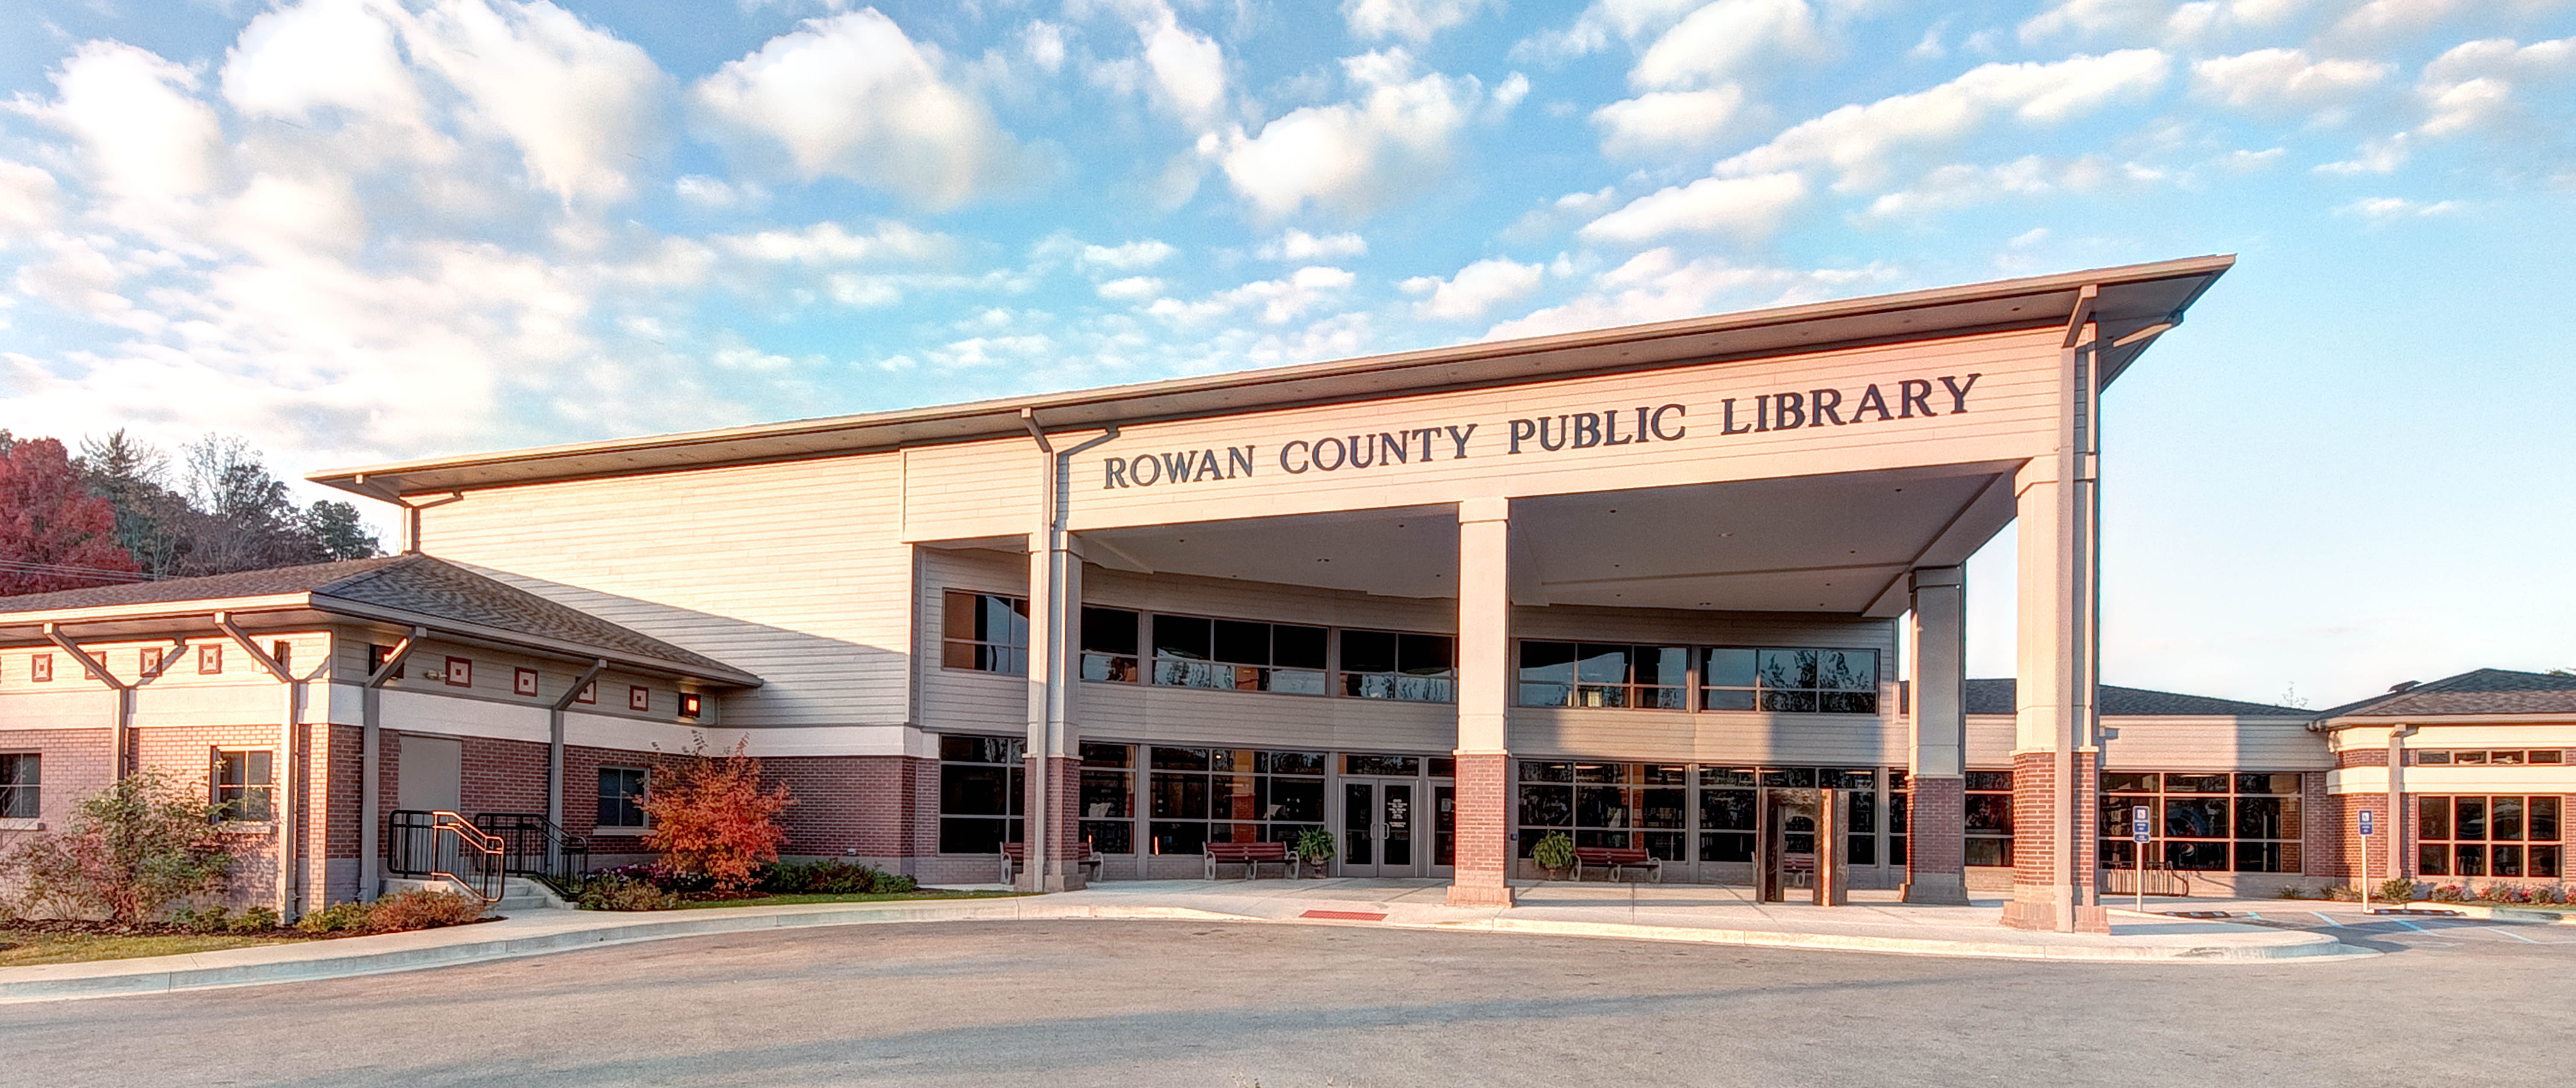 Exterior image of the Rowan County Public Library building